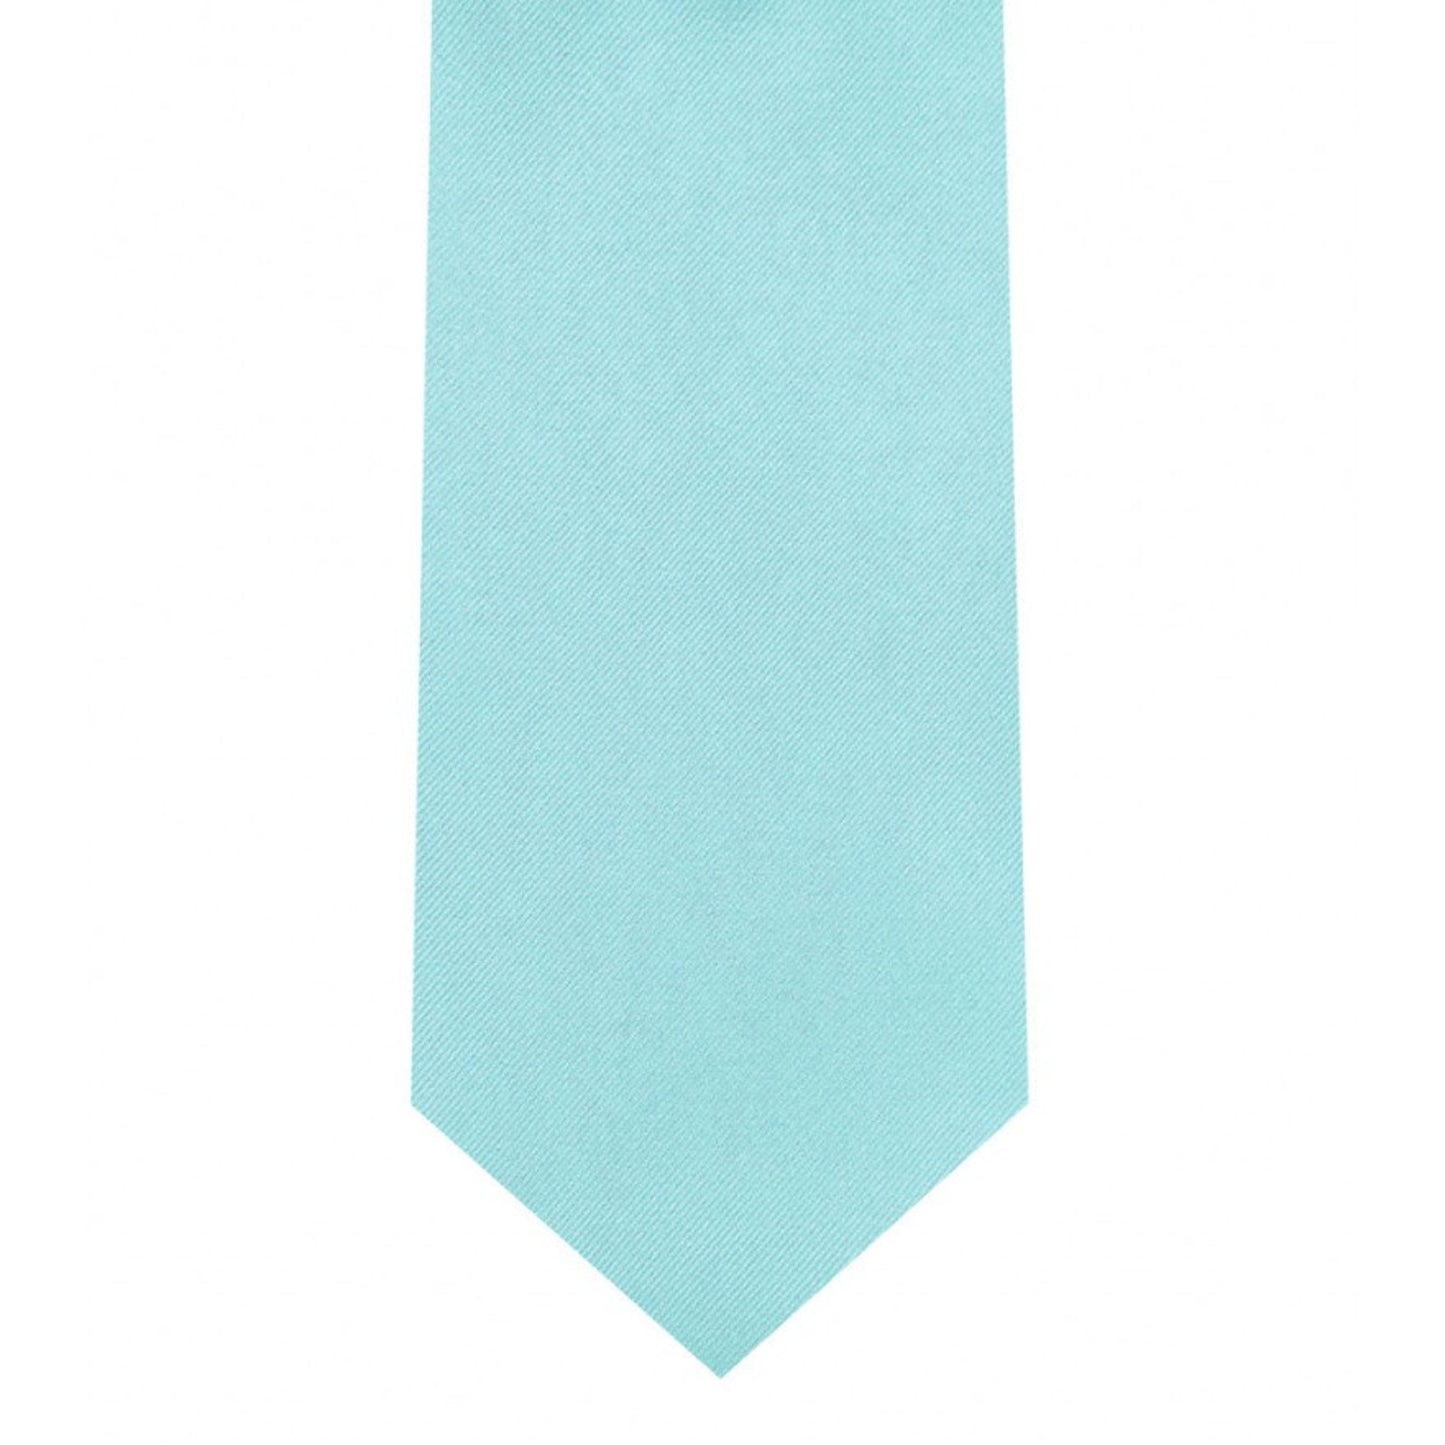 Classic Tiffany Blue Tie Skinny width 2.75 inches With Matching Pocket Square | KCT Menswear 